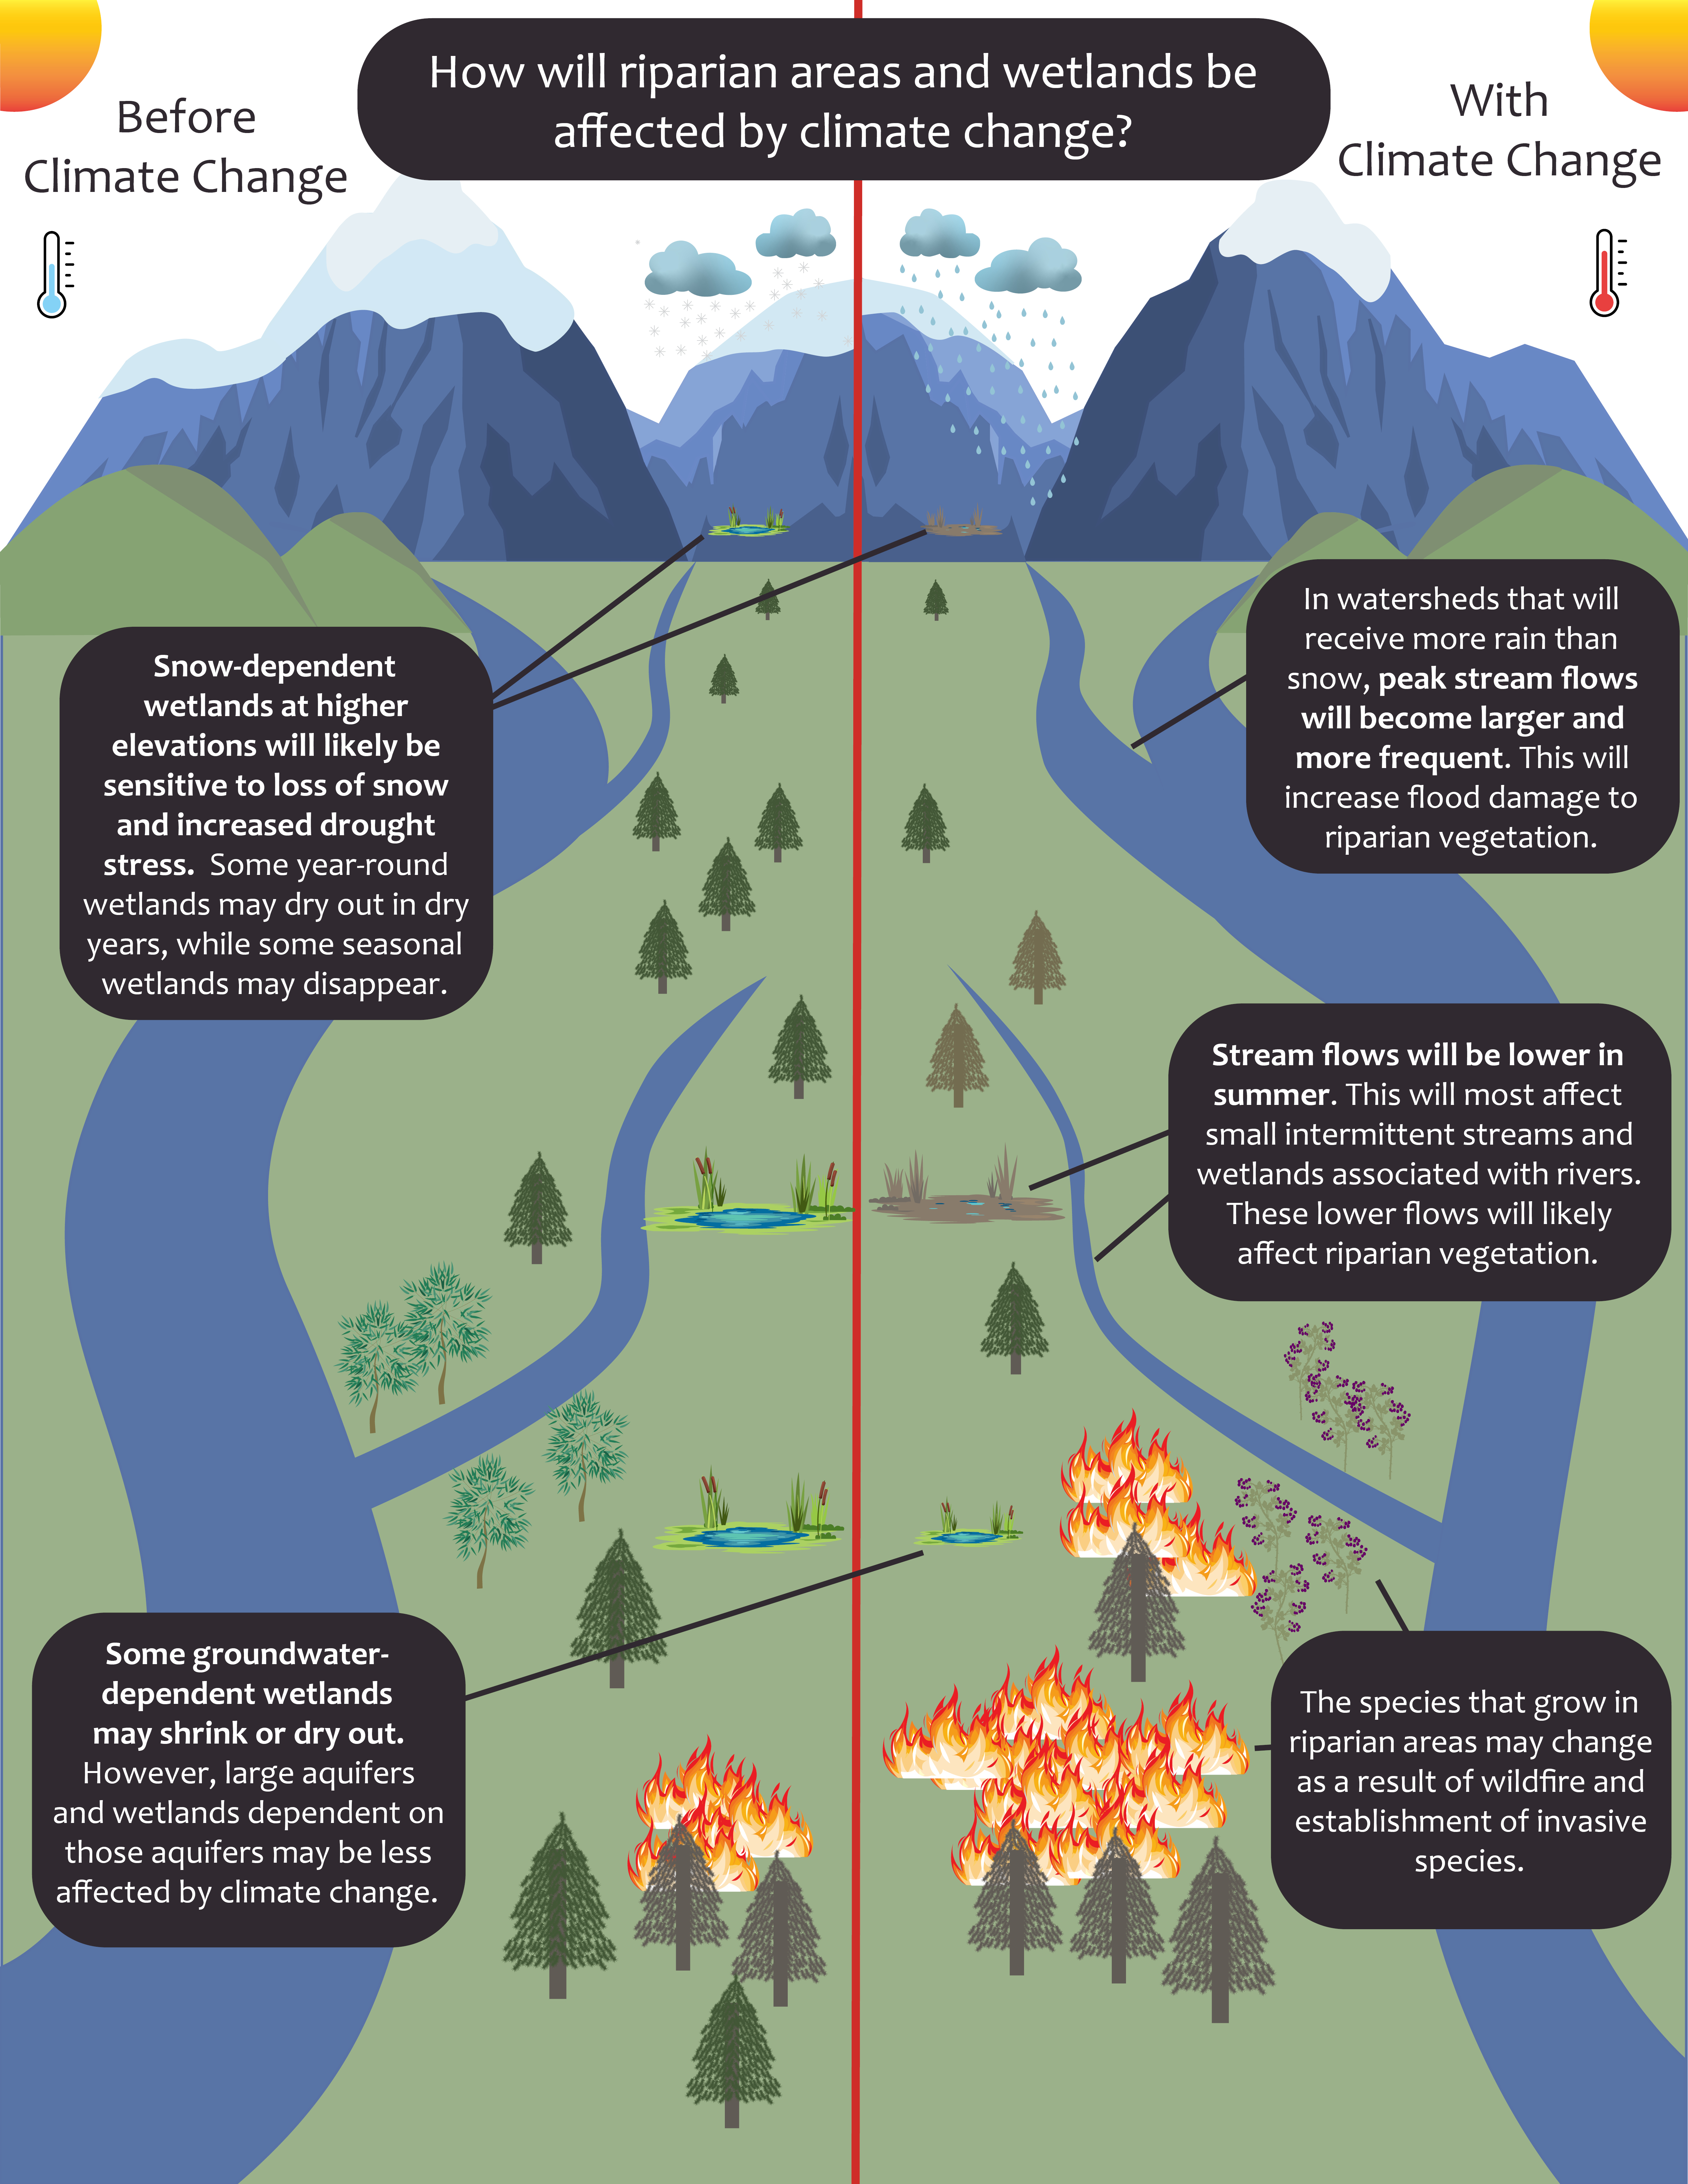 A diagram featured in the riparian areas and wetlands factsheet which outlines the changes which will be seen to riparian areas and wetland with climate change